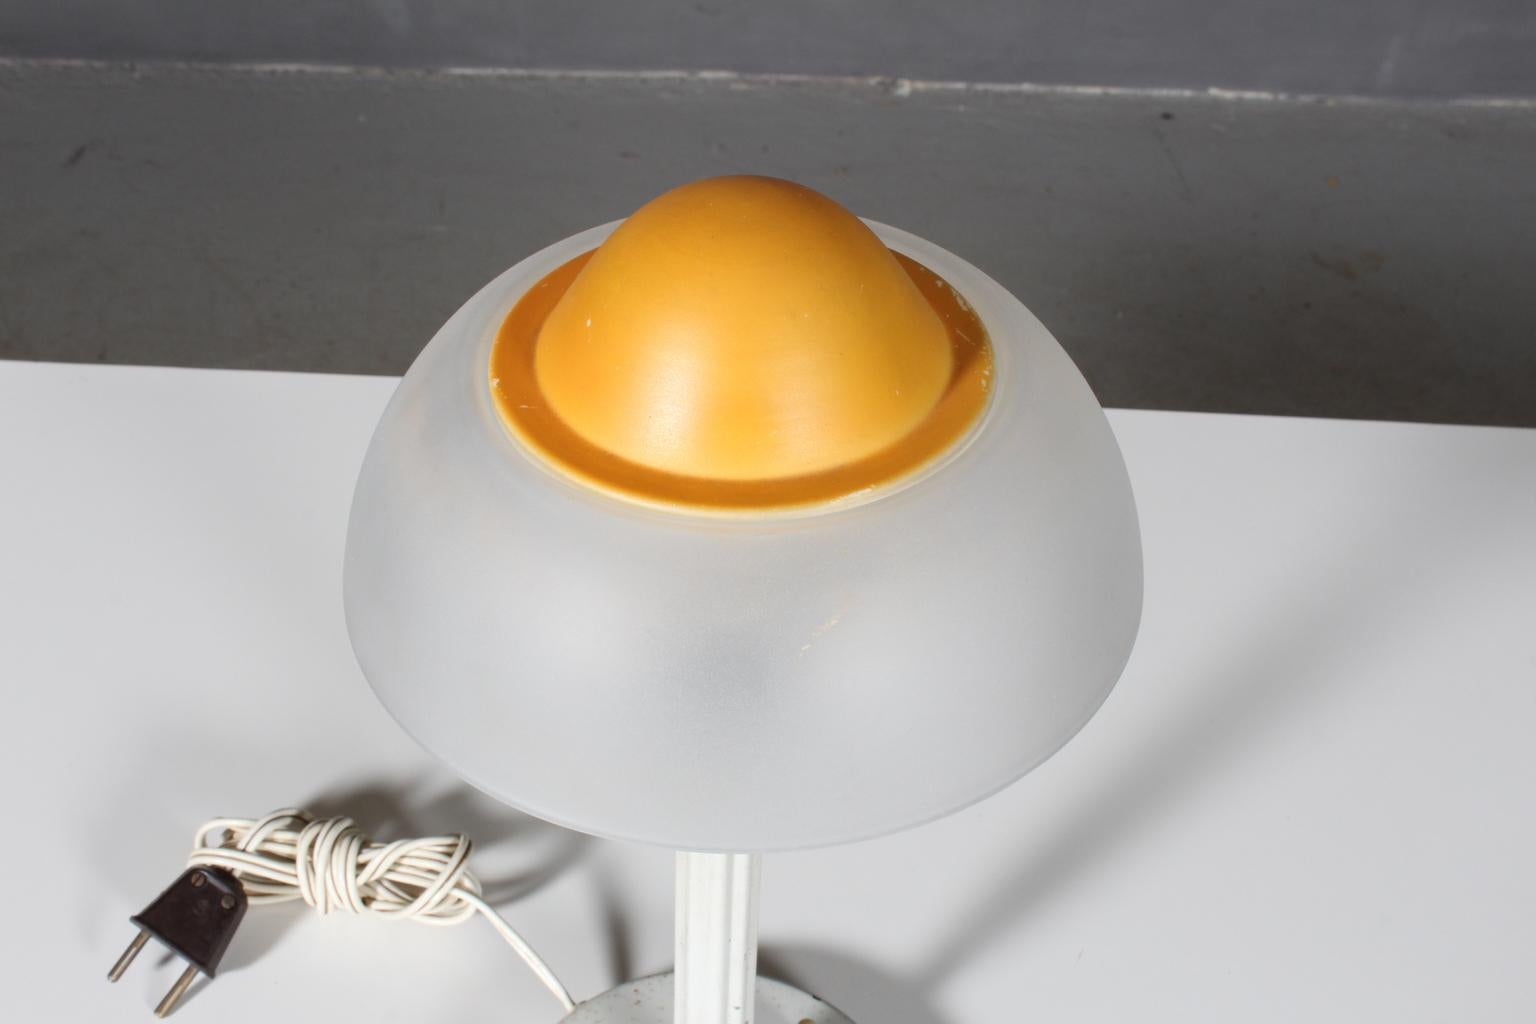 Fog & Mørup table lamp in brass.

Shades of opal glass.

Made by Fog & Mørup in the 1960s, model Fried egg.